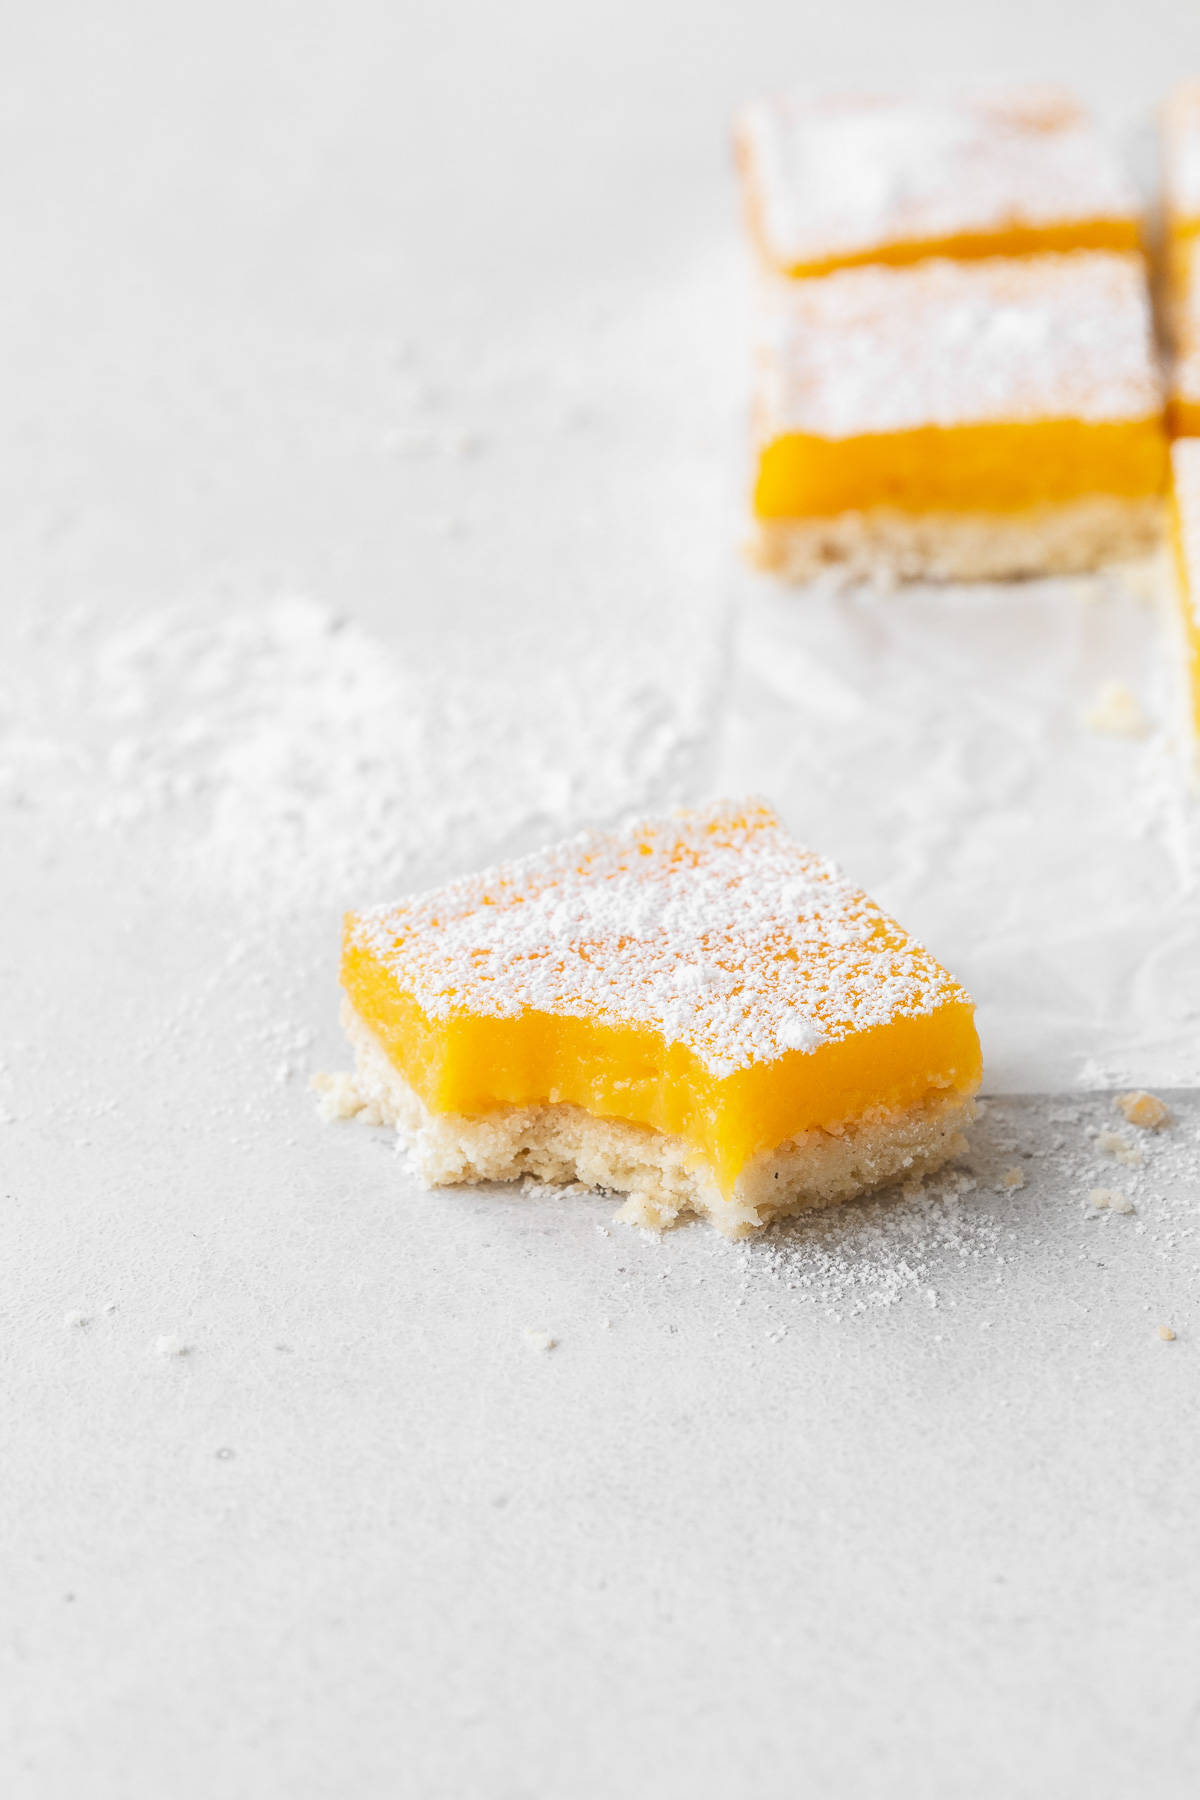 A dairy-free lemon bar with a bite taken out of it sitting on the counter with powdered sugar.